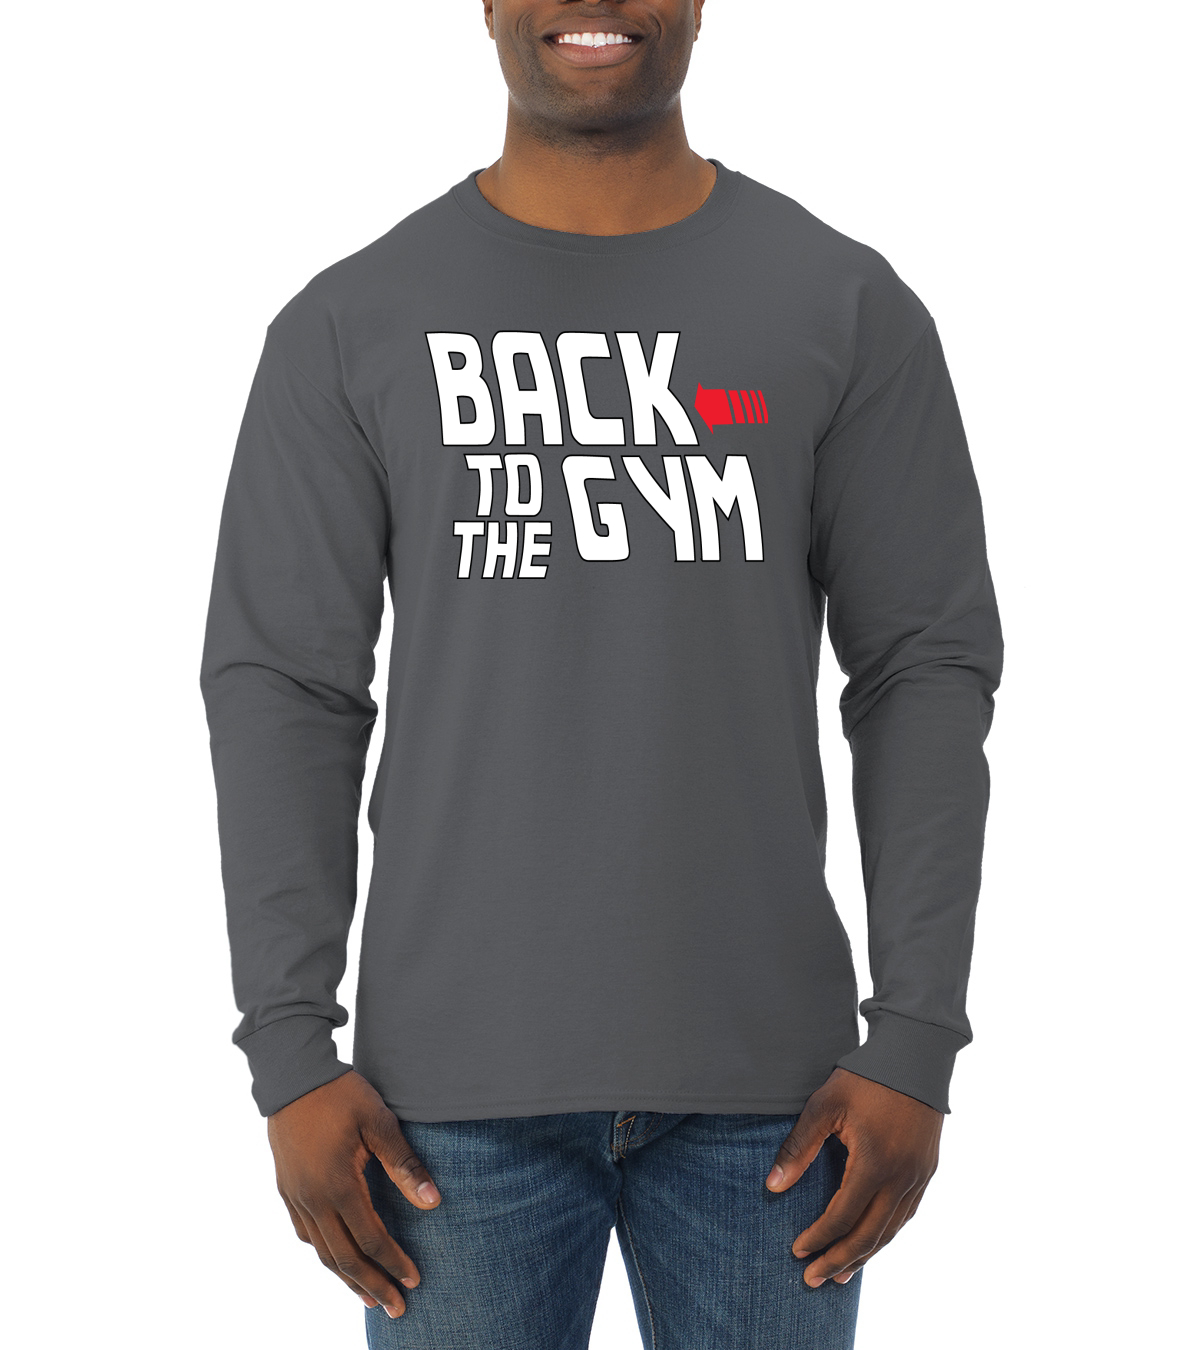 Back to the Gym Logo Parody Mens Workout Humor Long Sleeve T-Shirt ...